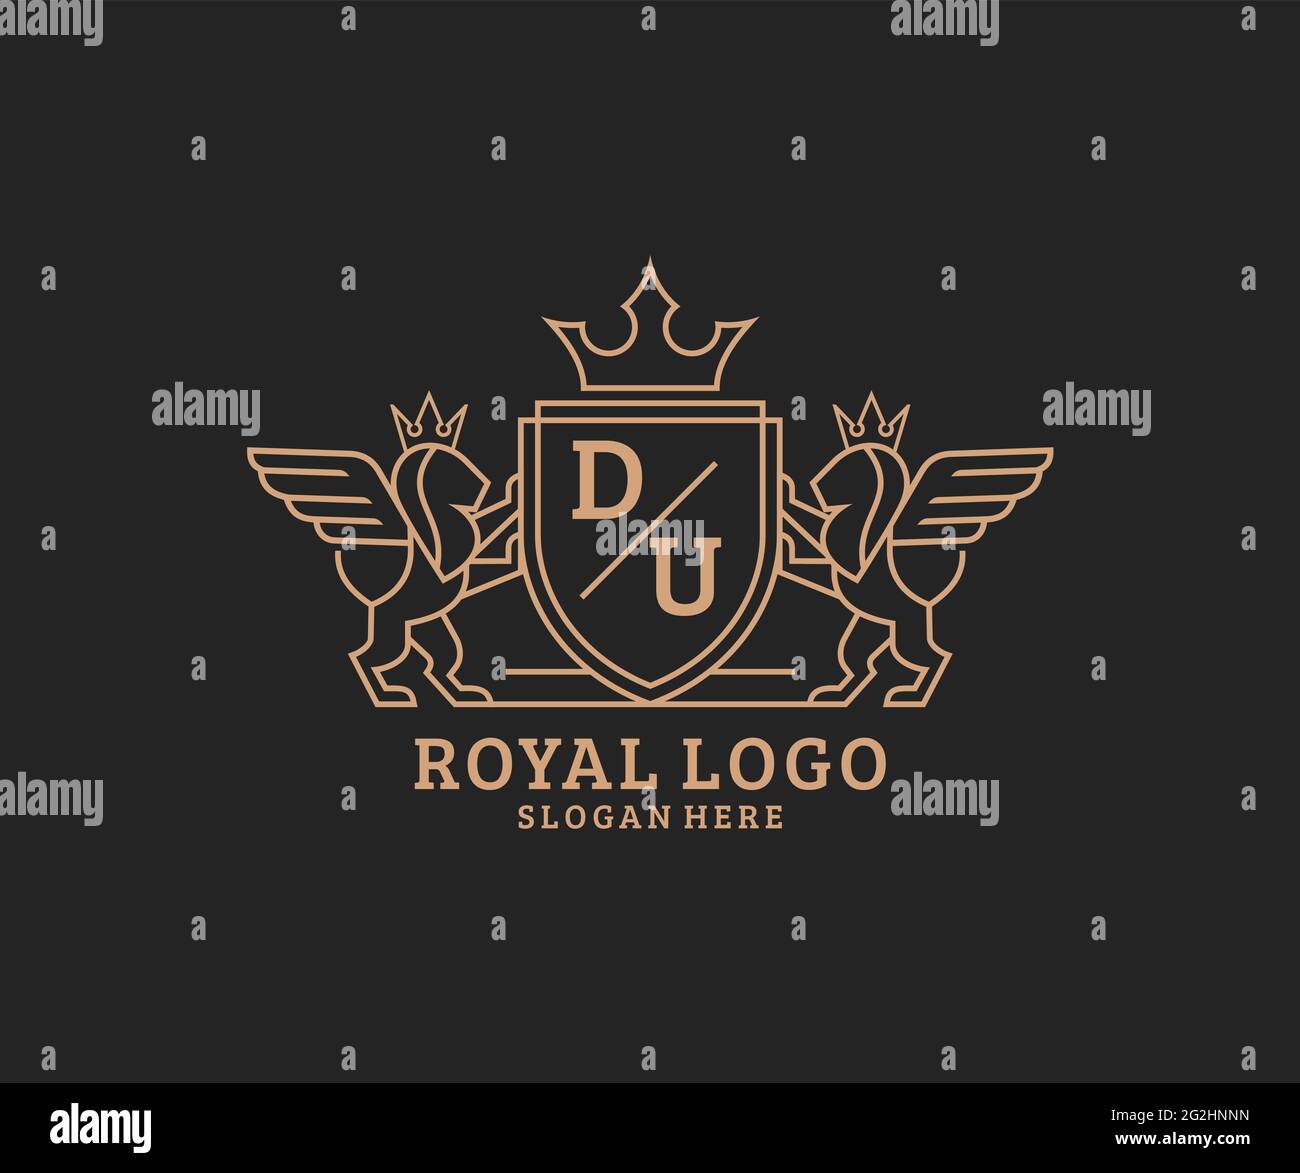 DU Letter Lion Royal Luxury Heraldic,Crest Logo template in vector art for Restaurant, Royalty, Boutique, Cafe, Hotel, Heraldic, Jewelry, Fashion and Stock Vector